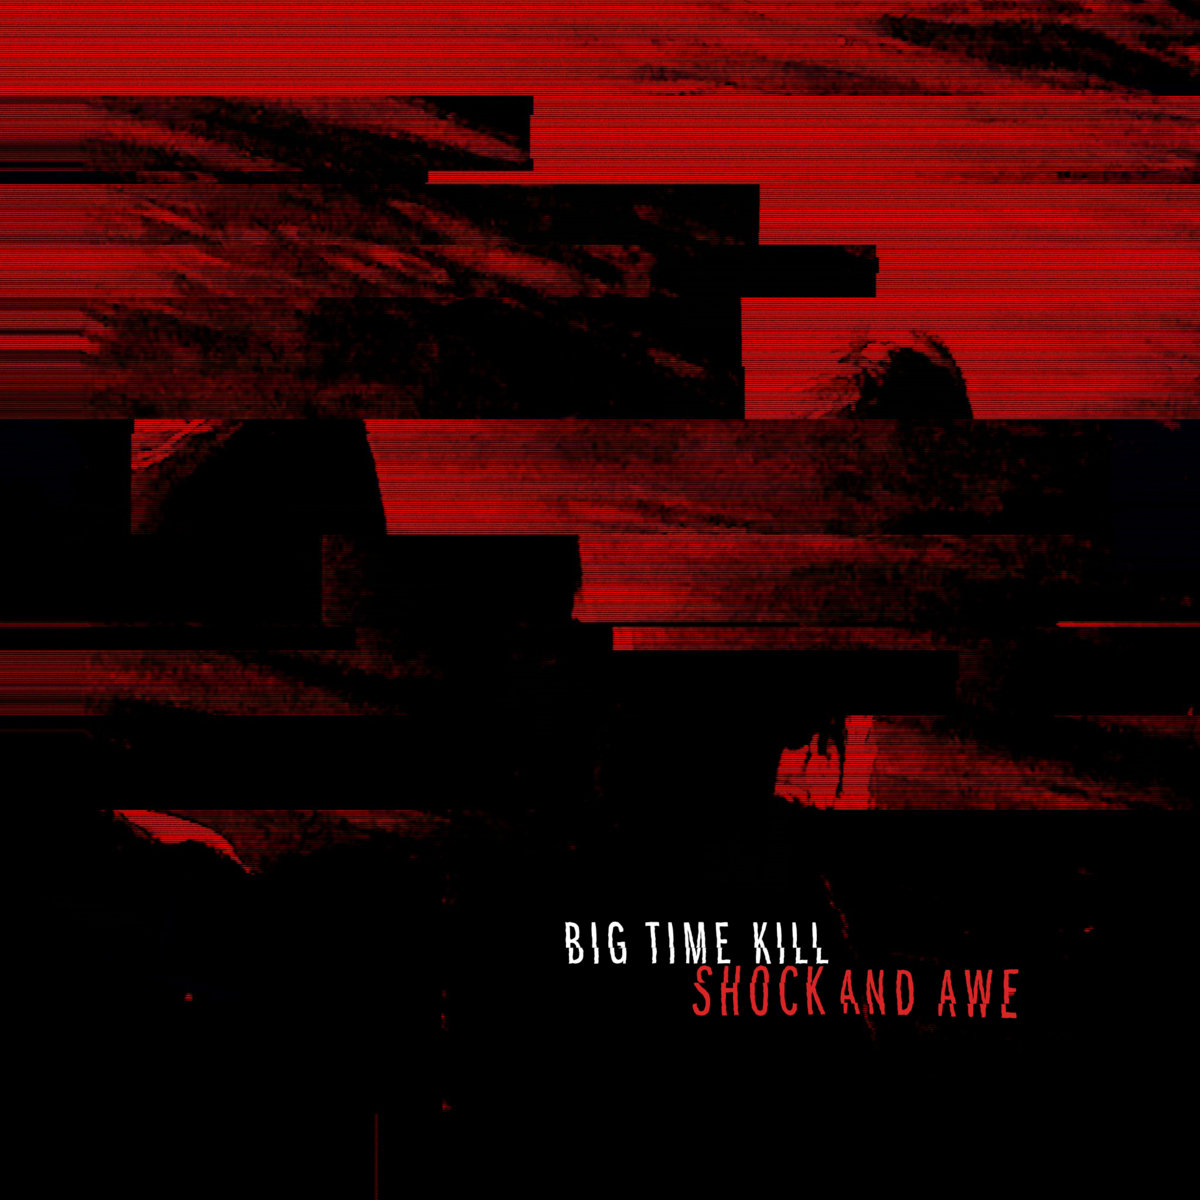 Big Time Kill: Shock and Awe album released